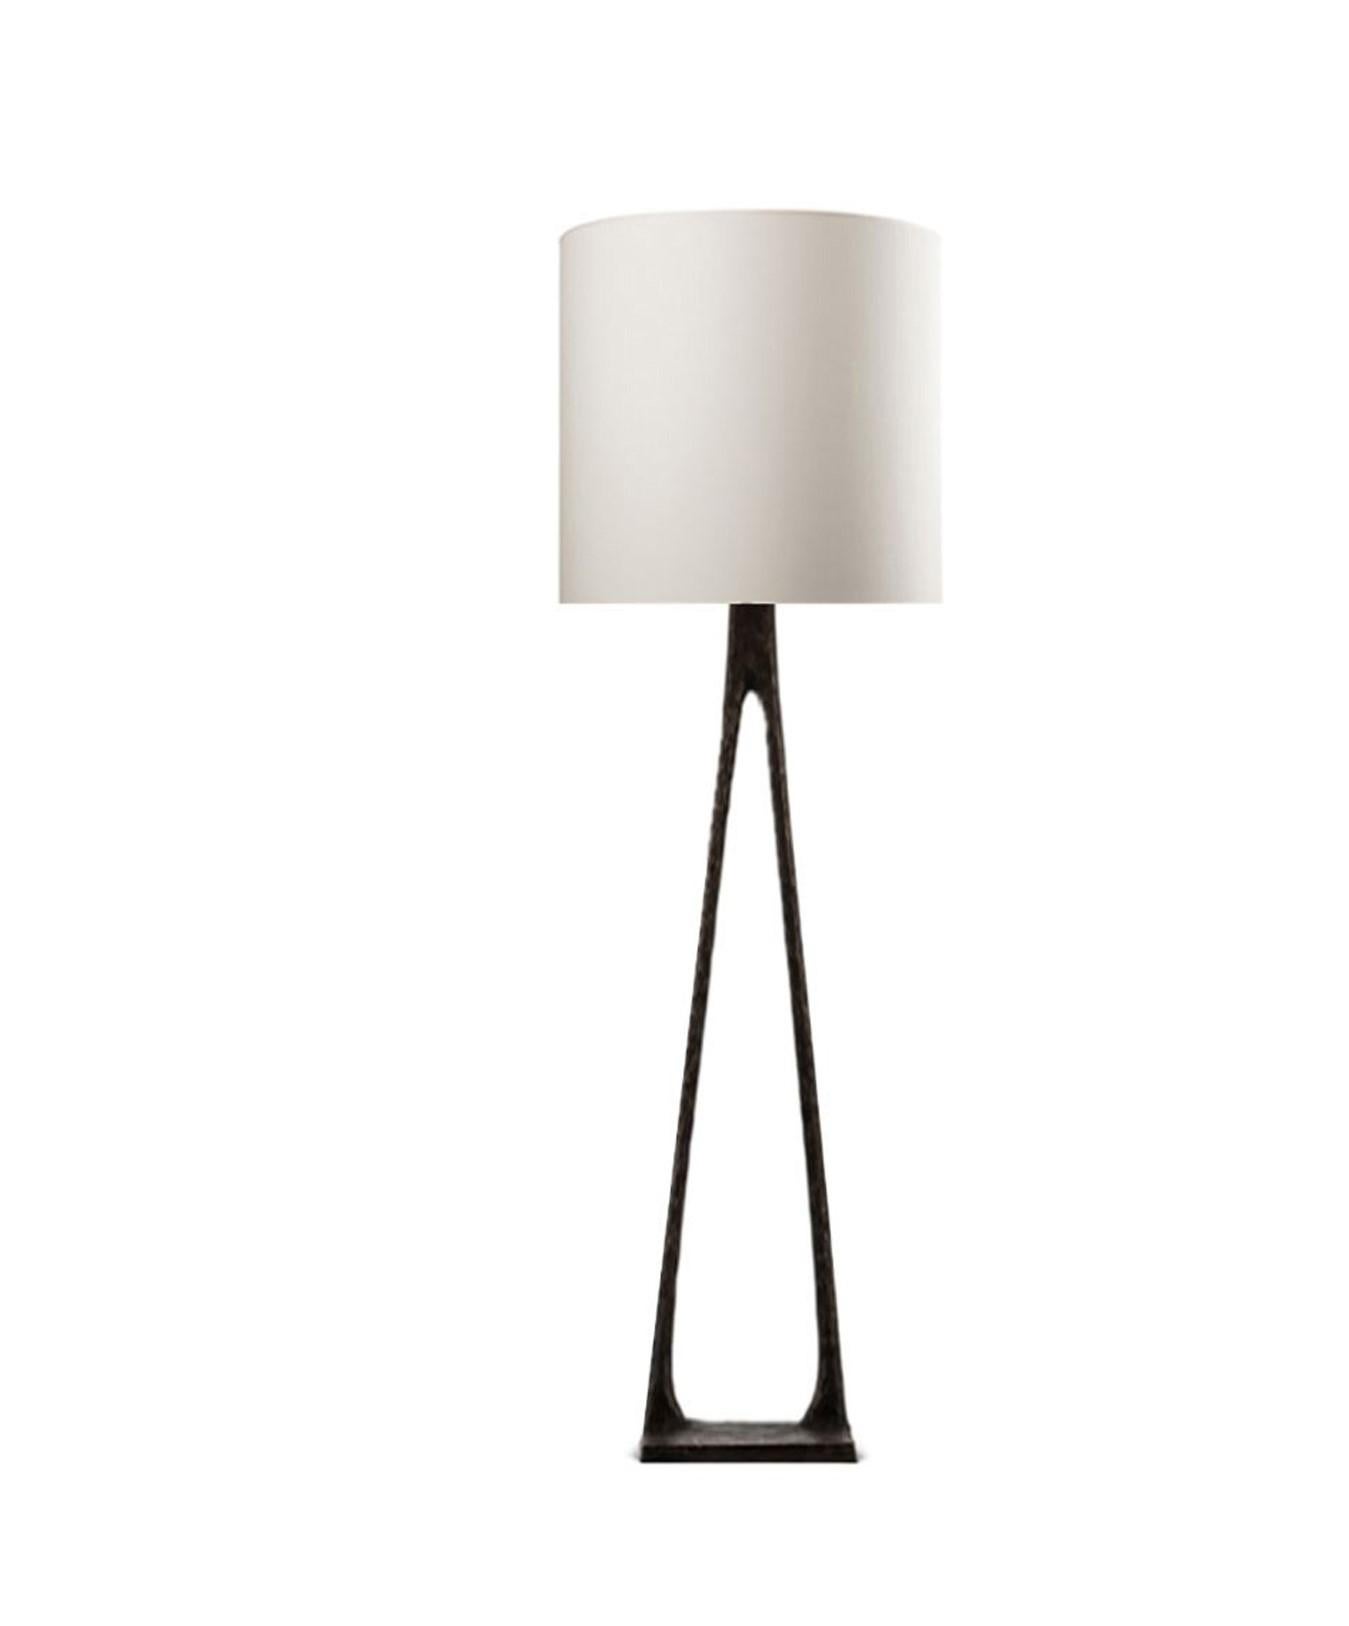 Passage floor lamp by LK Edition
Dimensions: 60 x 60 x 1.90 cm
Materials: Black Patineted Bronze, Paper Shade

It is with the sense of detail and requirement, this research of the exception by the selection of noble materials and his culture of